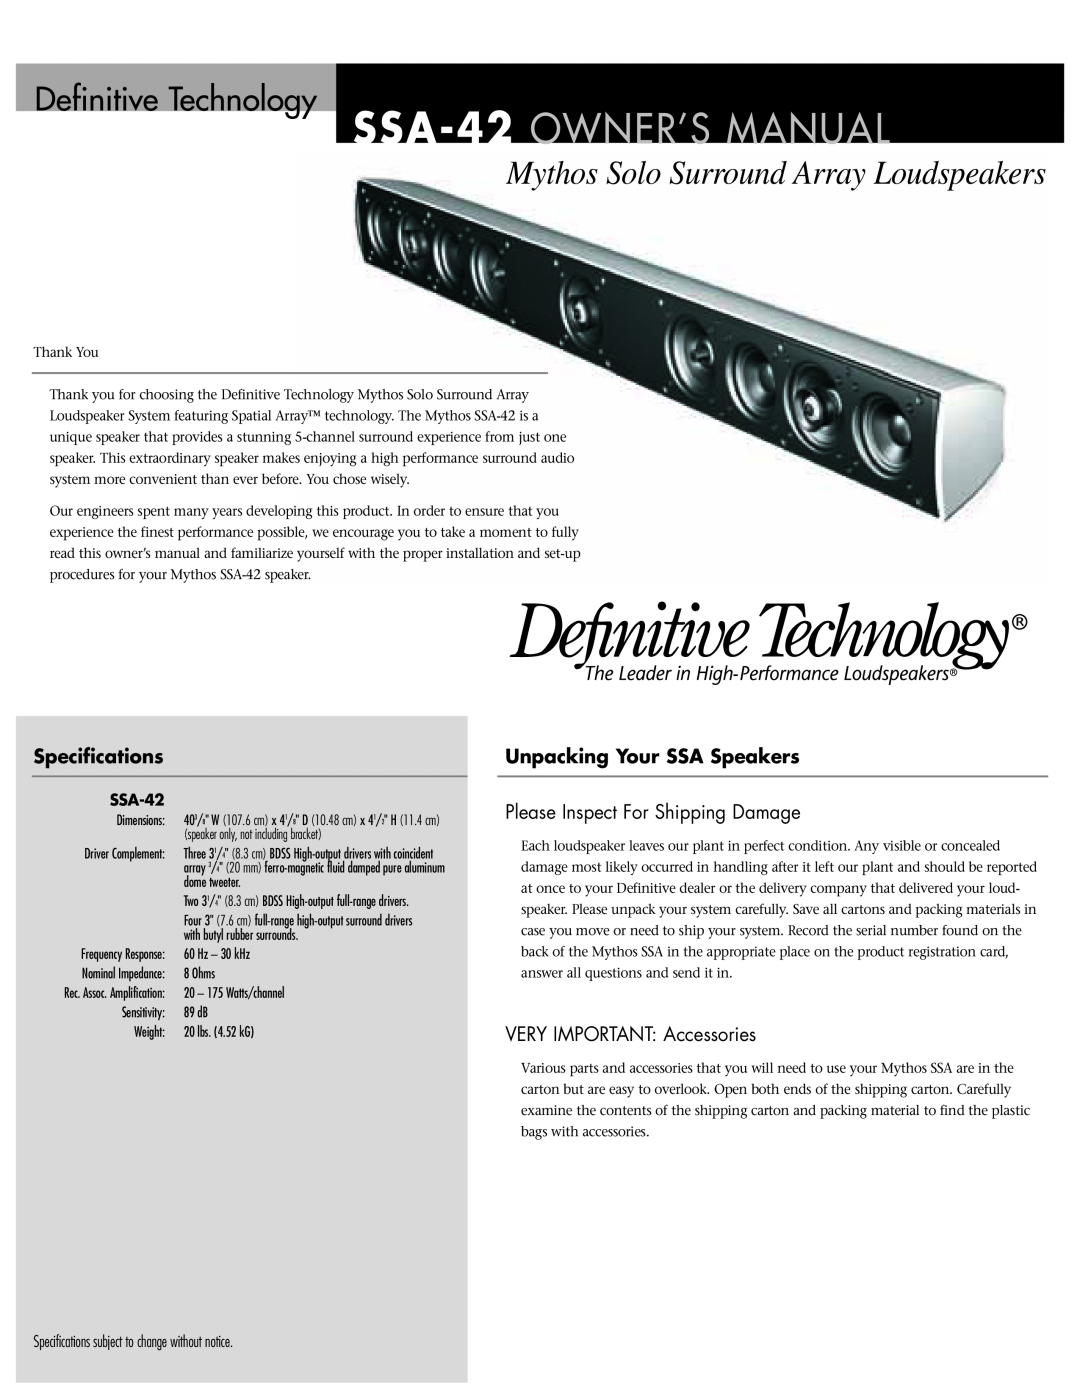 Definitive Technology SSA-42 specifications Specifications, Unpacking Your SSA Speakers, VERY IMPORTANT Accessories 